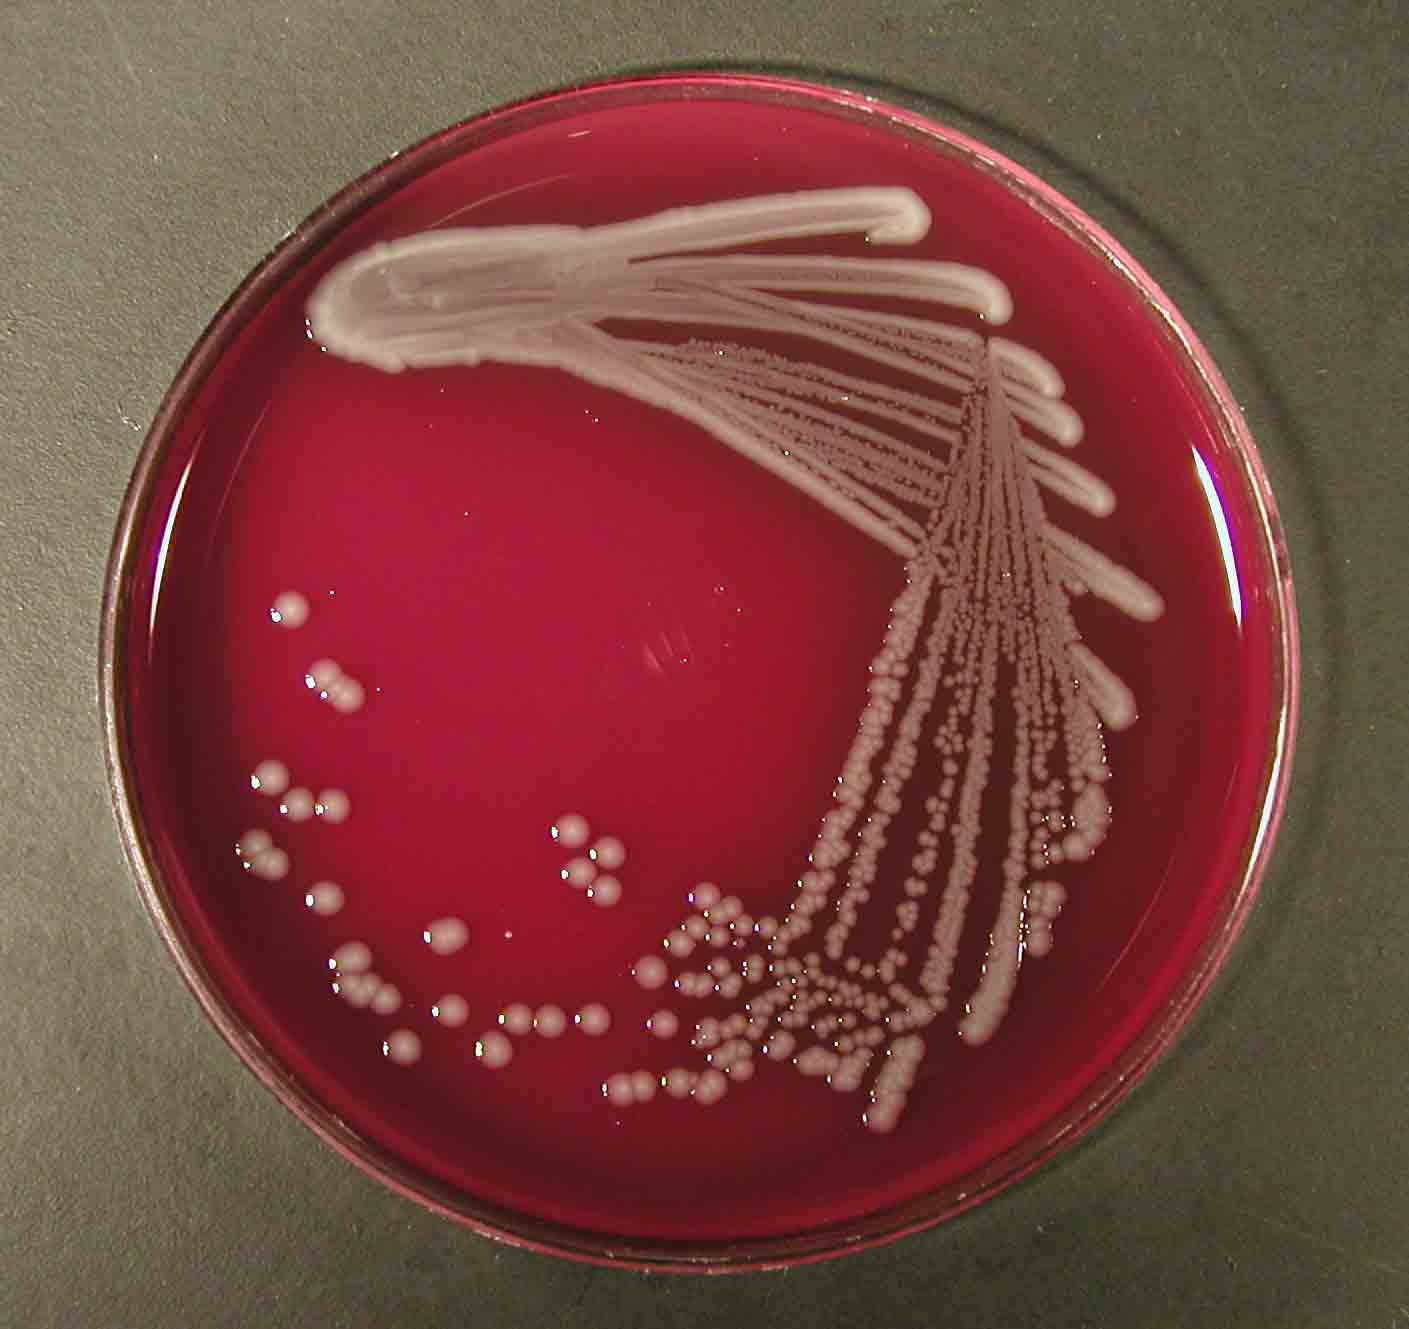 E.coli - culture on sheep blood agar. Click to zoom.